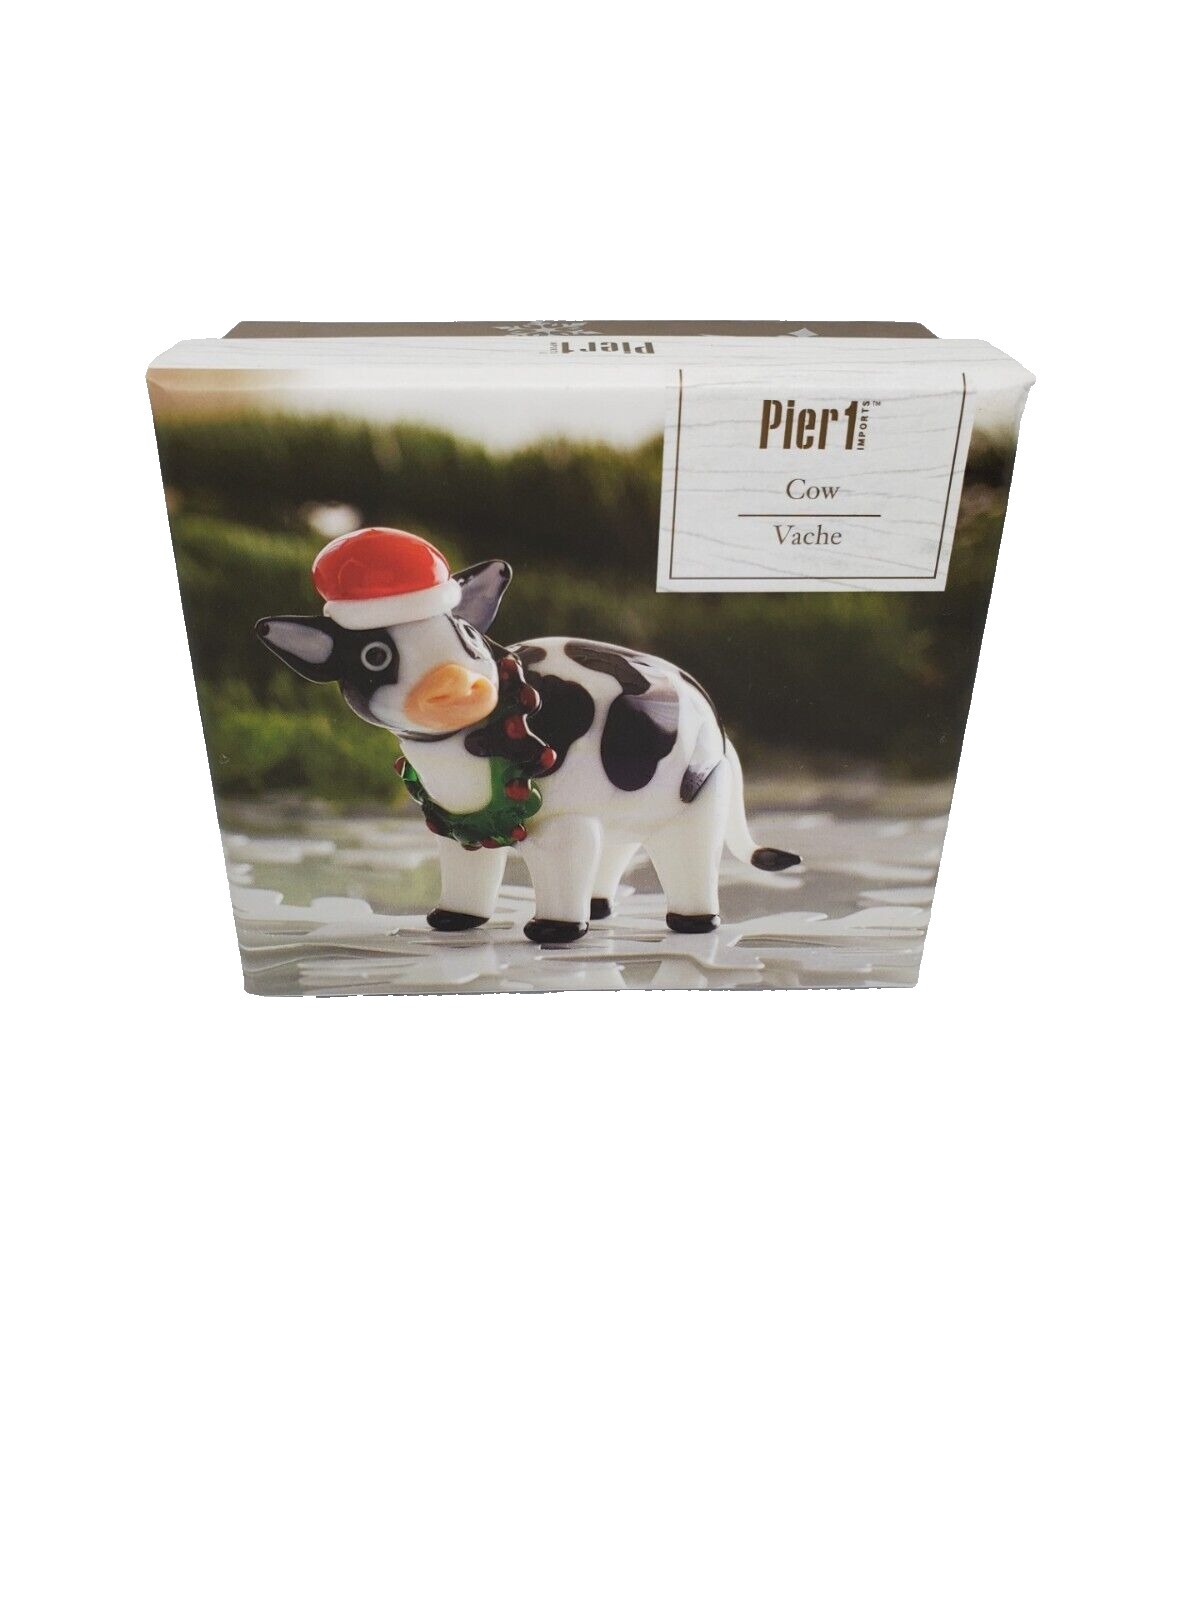 Pier One Art Glass Cow Heifer Figurine Handcrafted Christmas Decor - New in Box